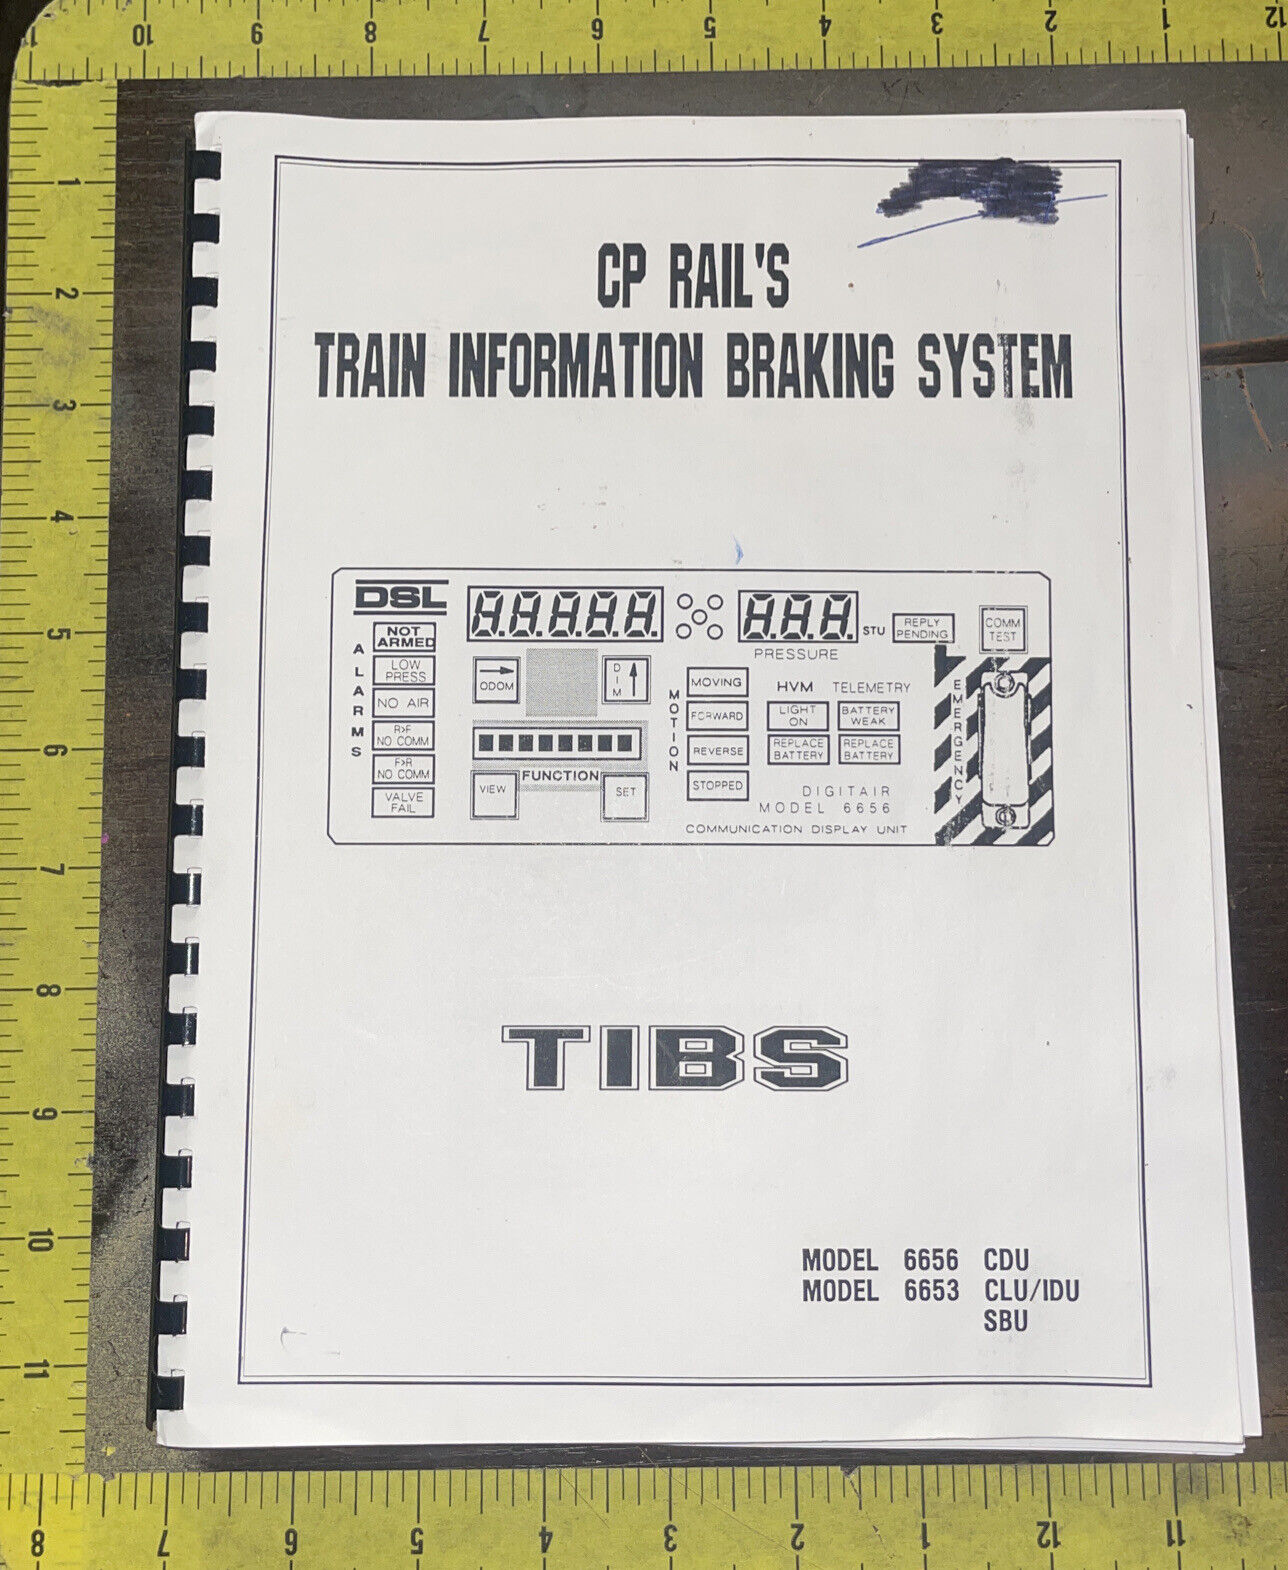 1992 CP Rail's Train Information Braking System For Models 6656,6653 Manual